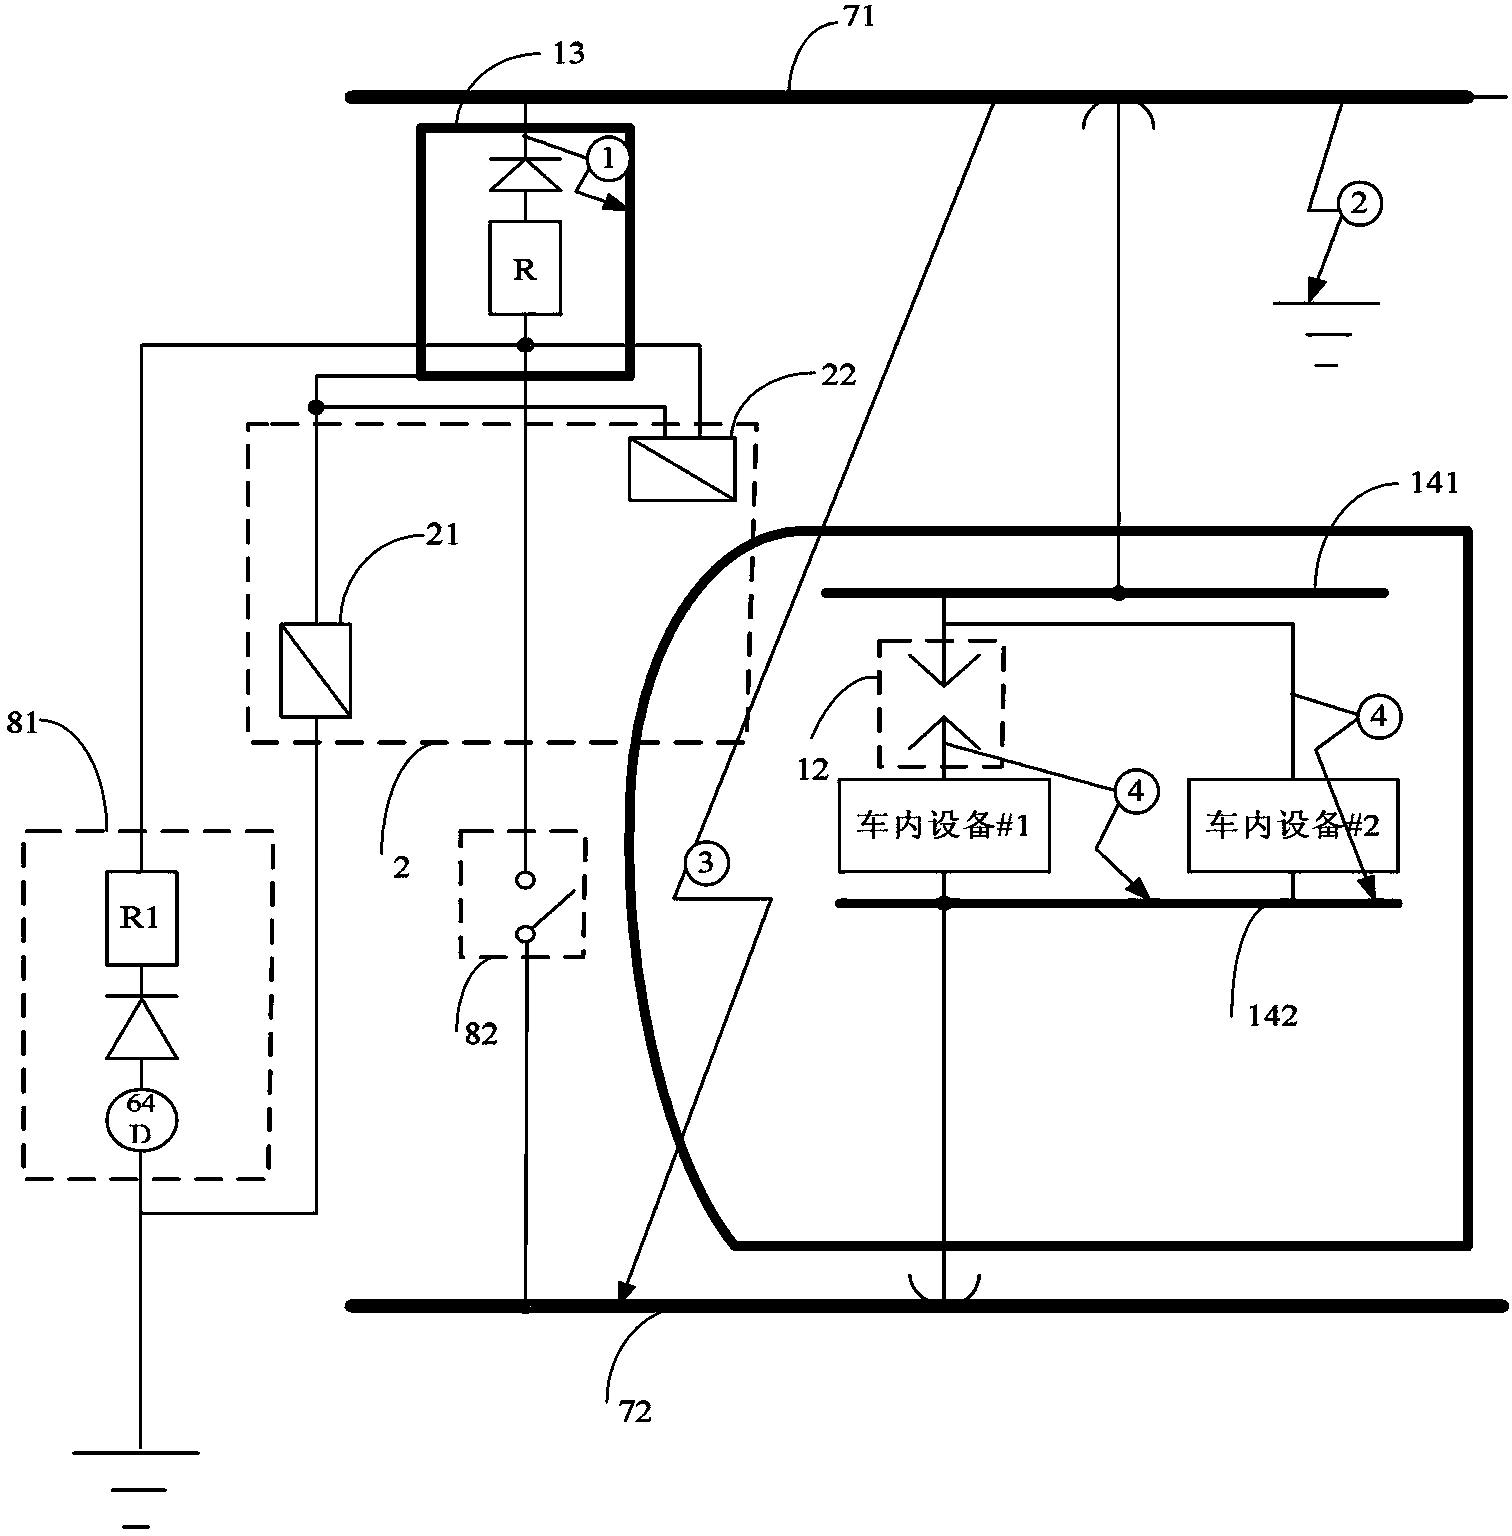 Integrated grounding system for medium-and-low-speed maglev train